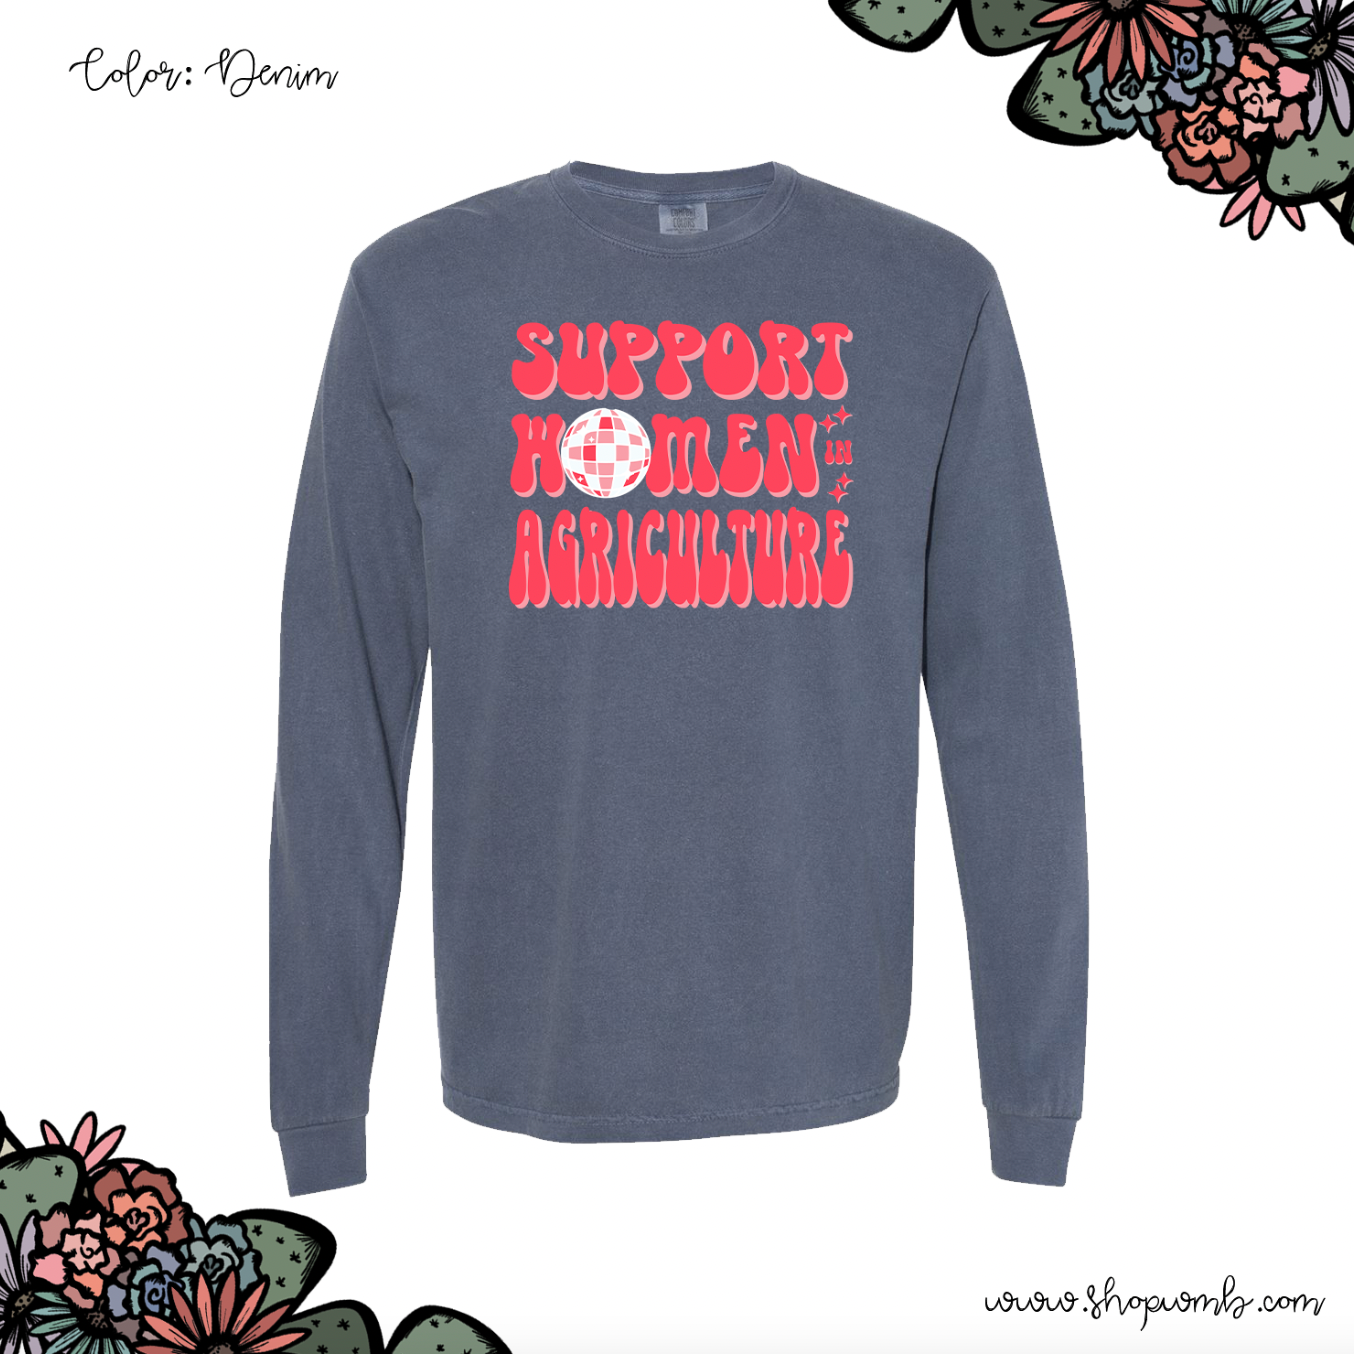 Disco Support Women In Agriculture LONG SLEEVE T-Shirt (S-3XL) - Multiple Colors!